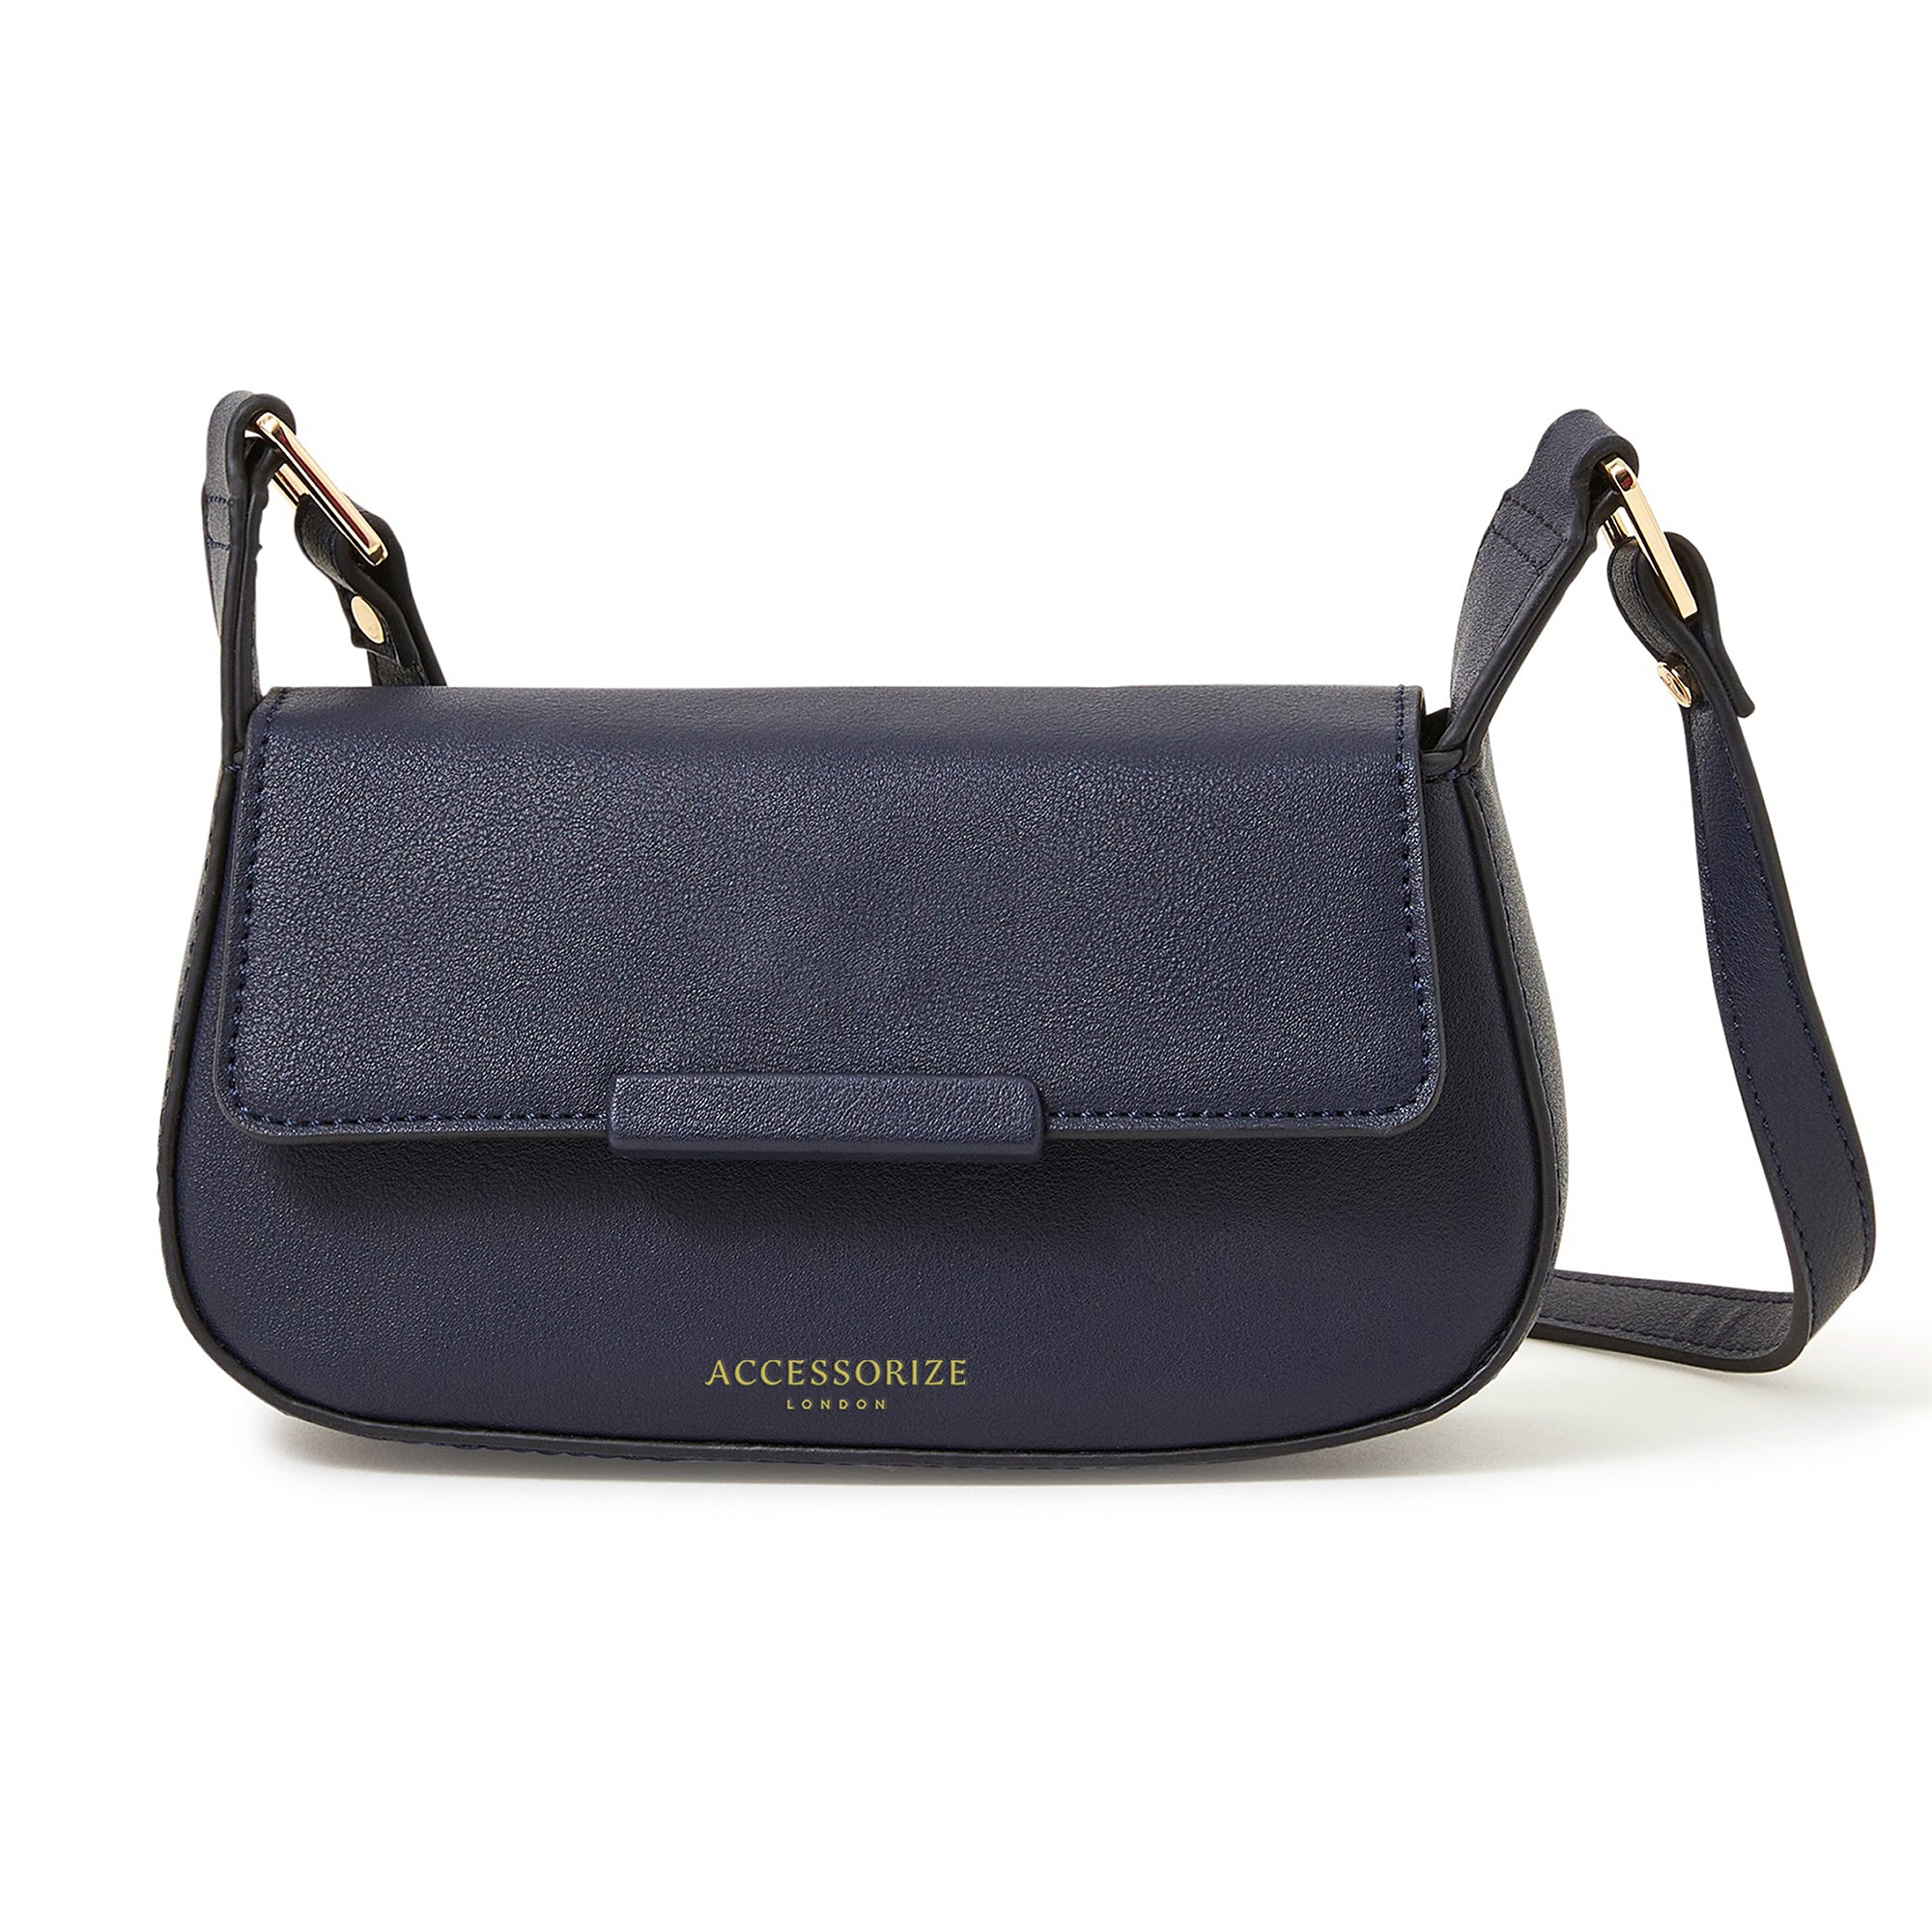 Accessorize London Women's Faux Leather Navy Small Saddle Sling Bag